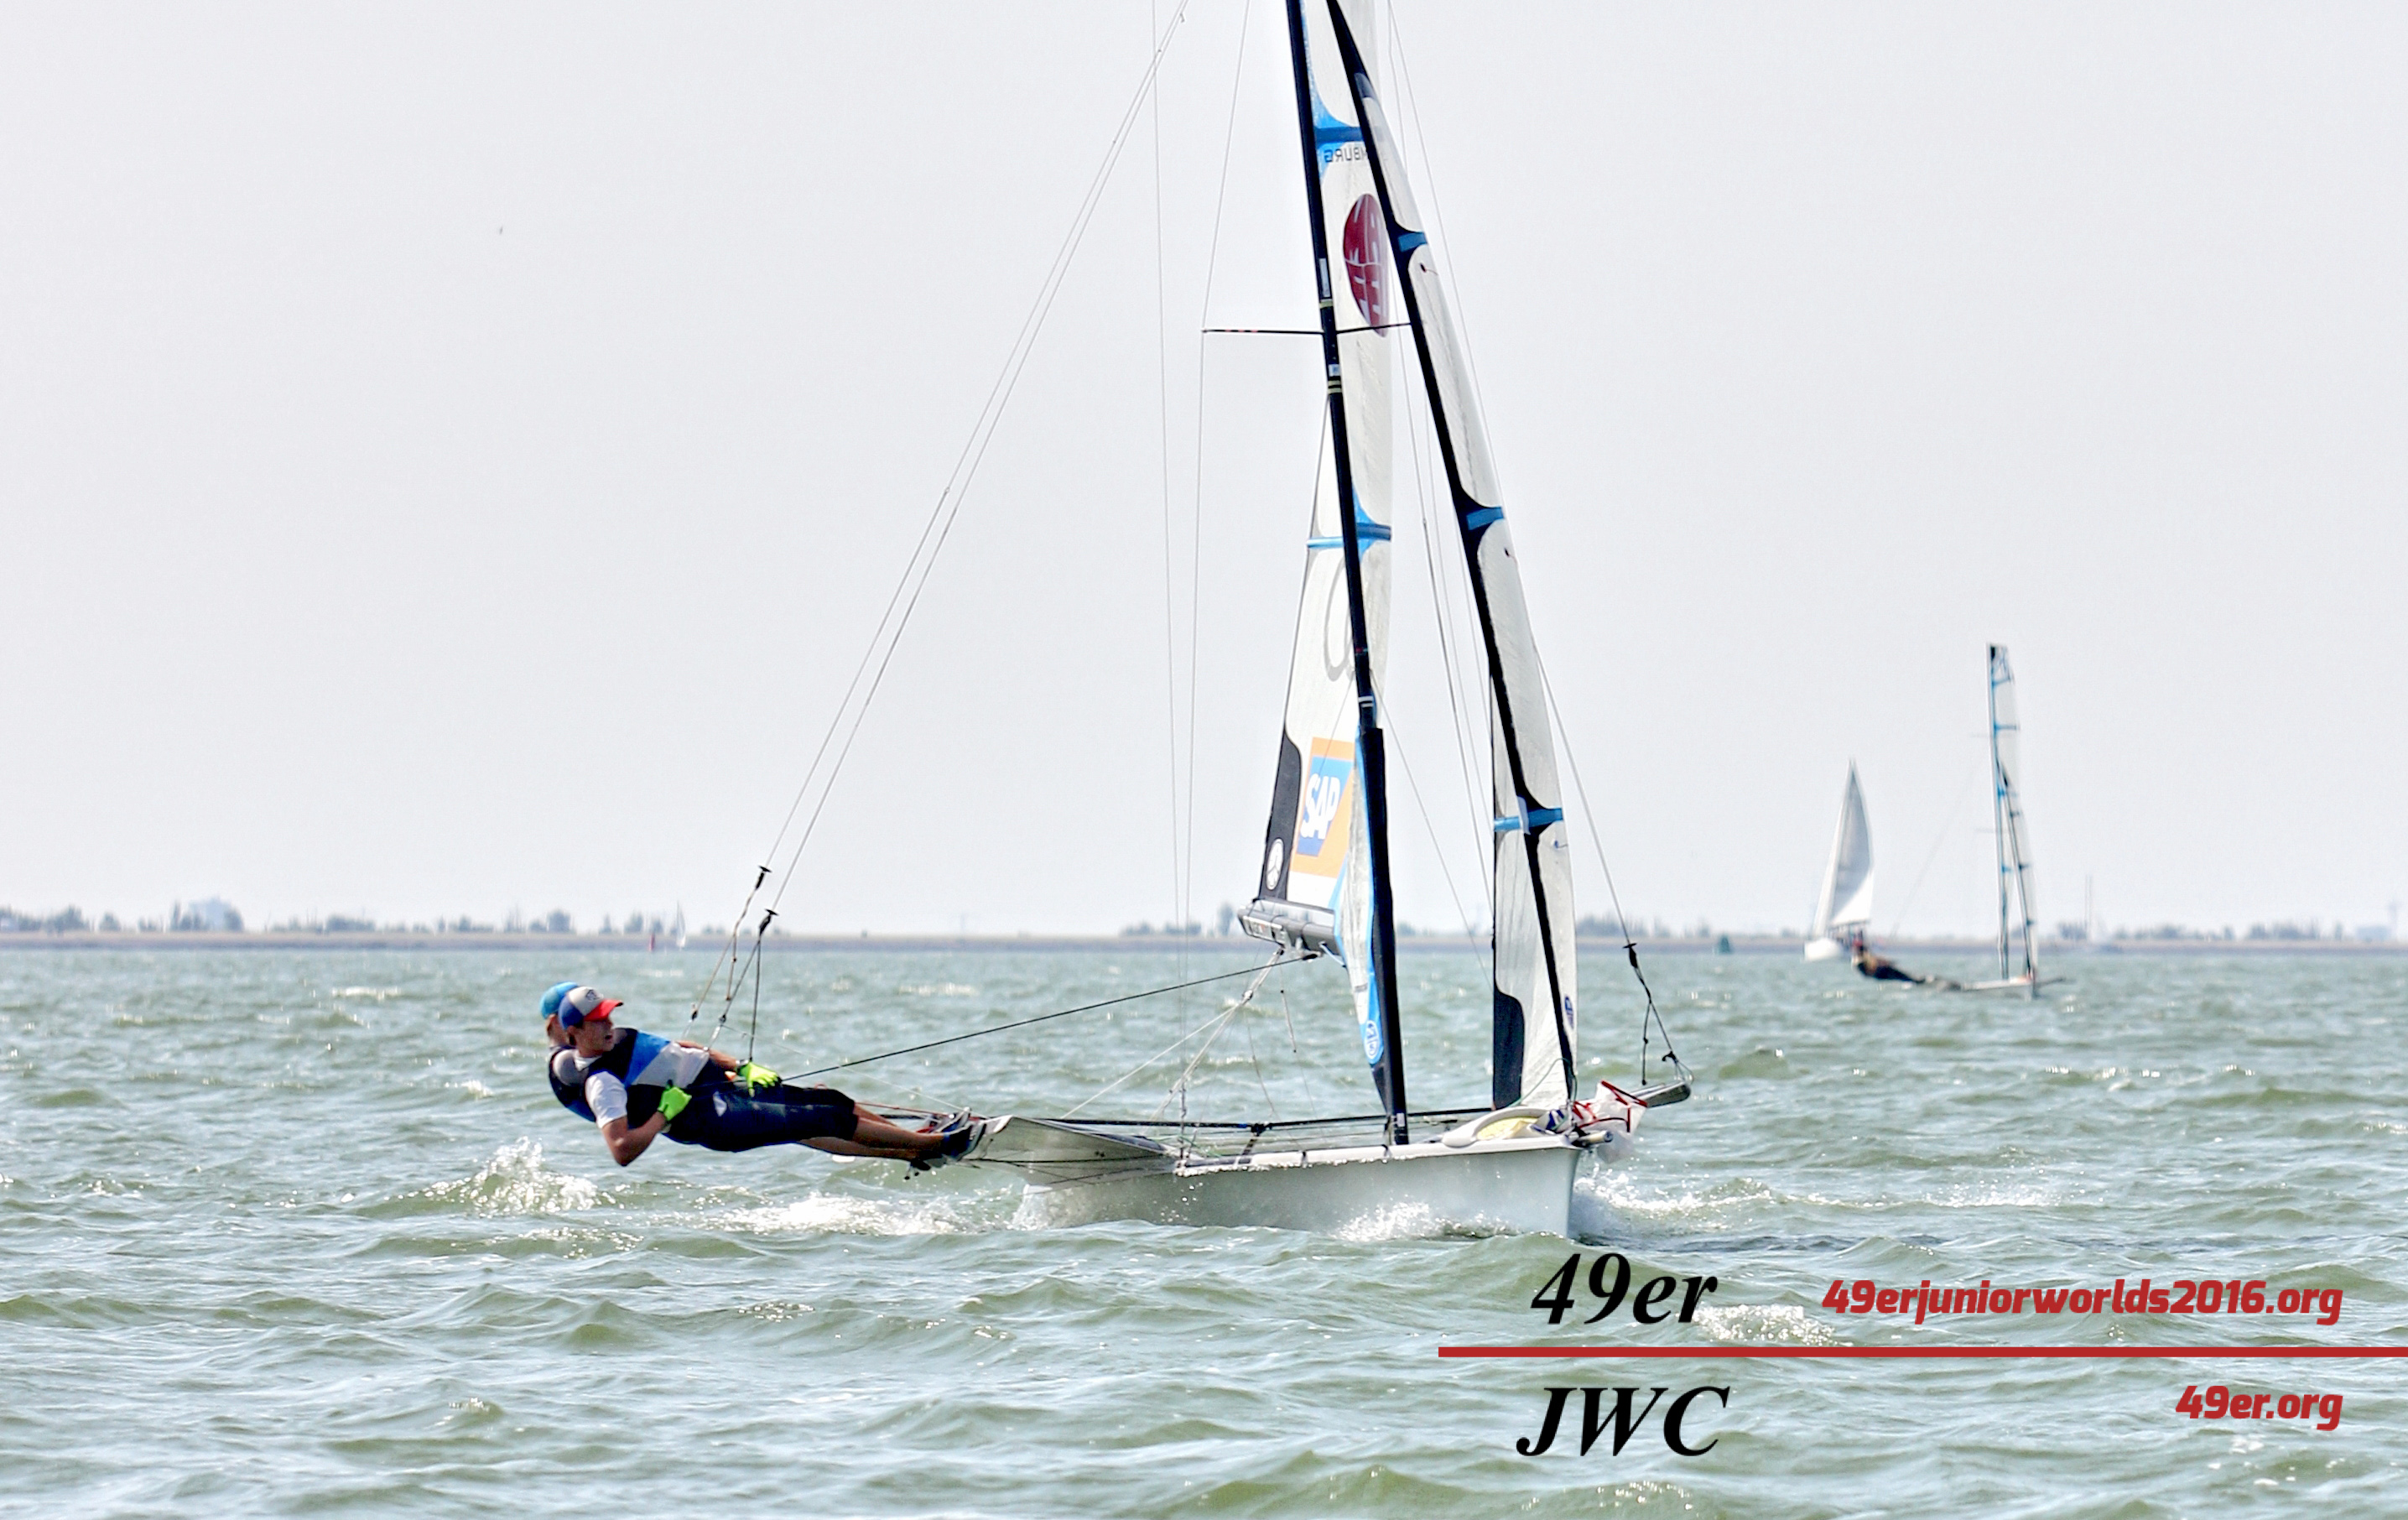 Dutchies are leading at the Junior Worlds in Lelystad